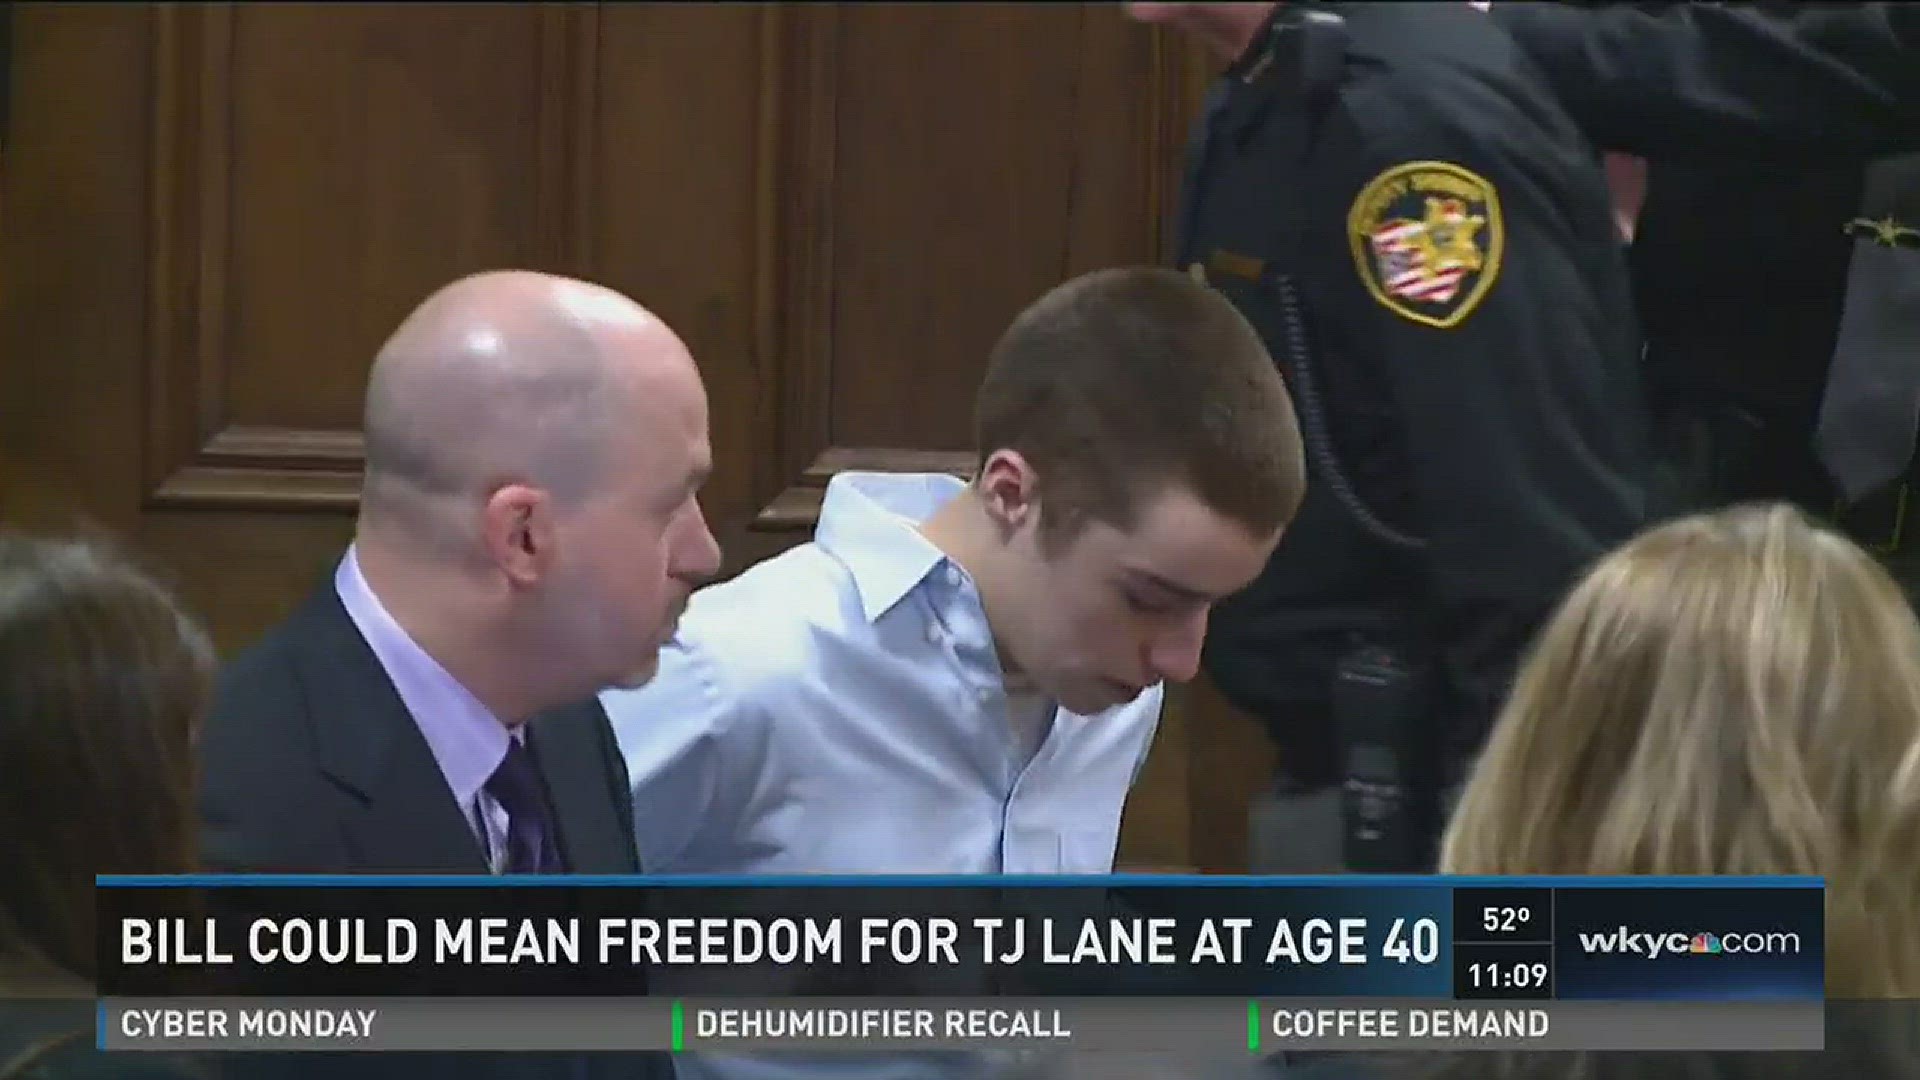 Bill could mean freedom for TJ Lane at 40